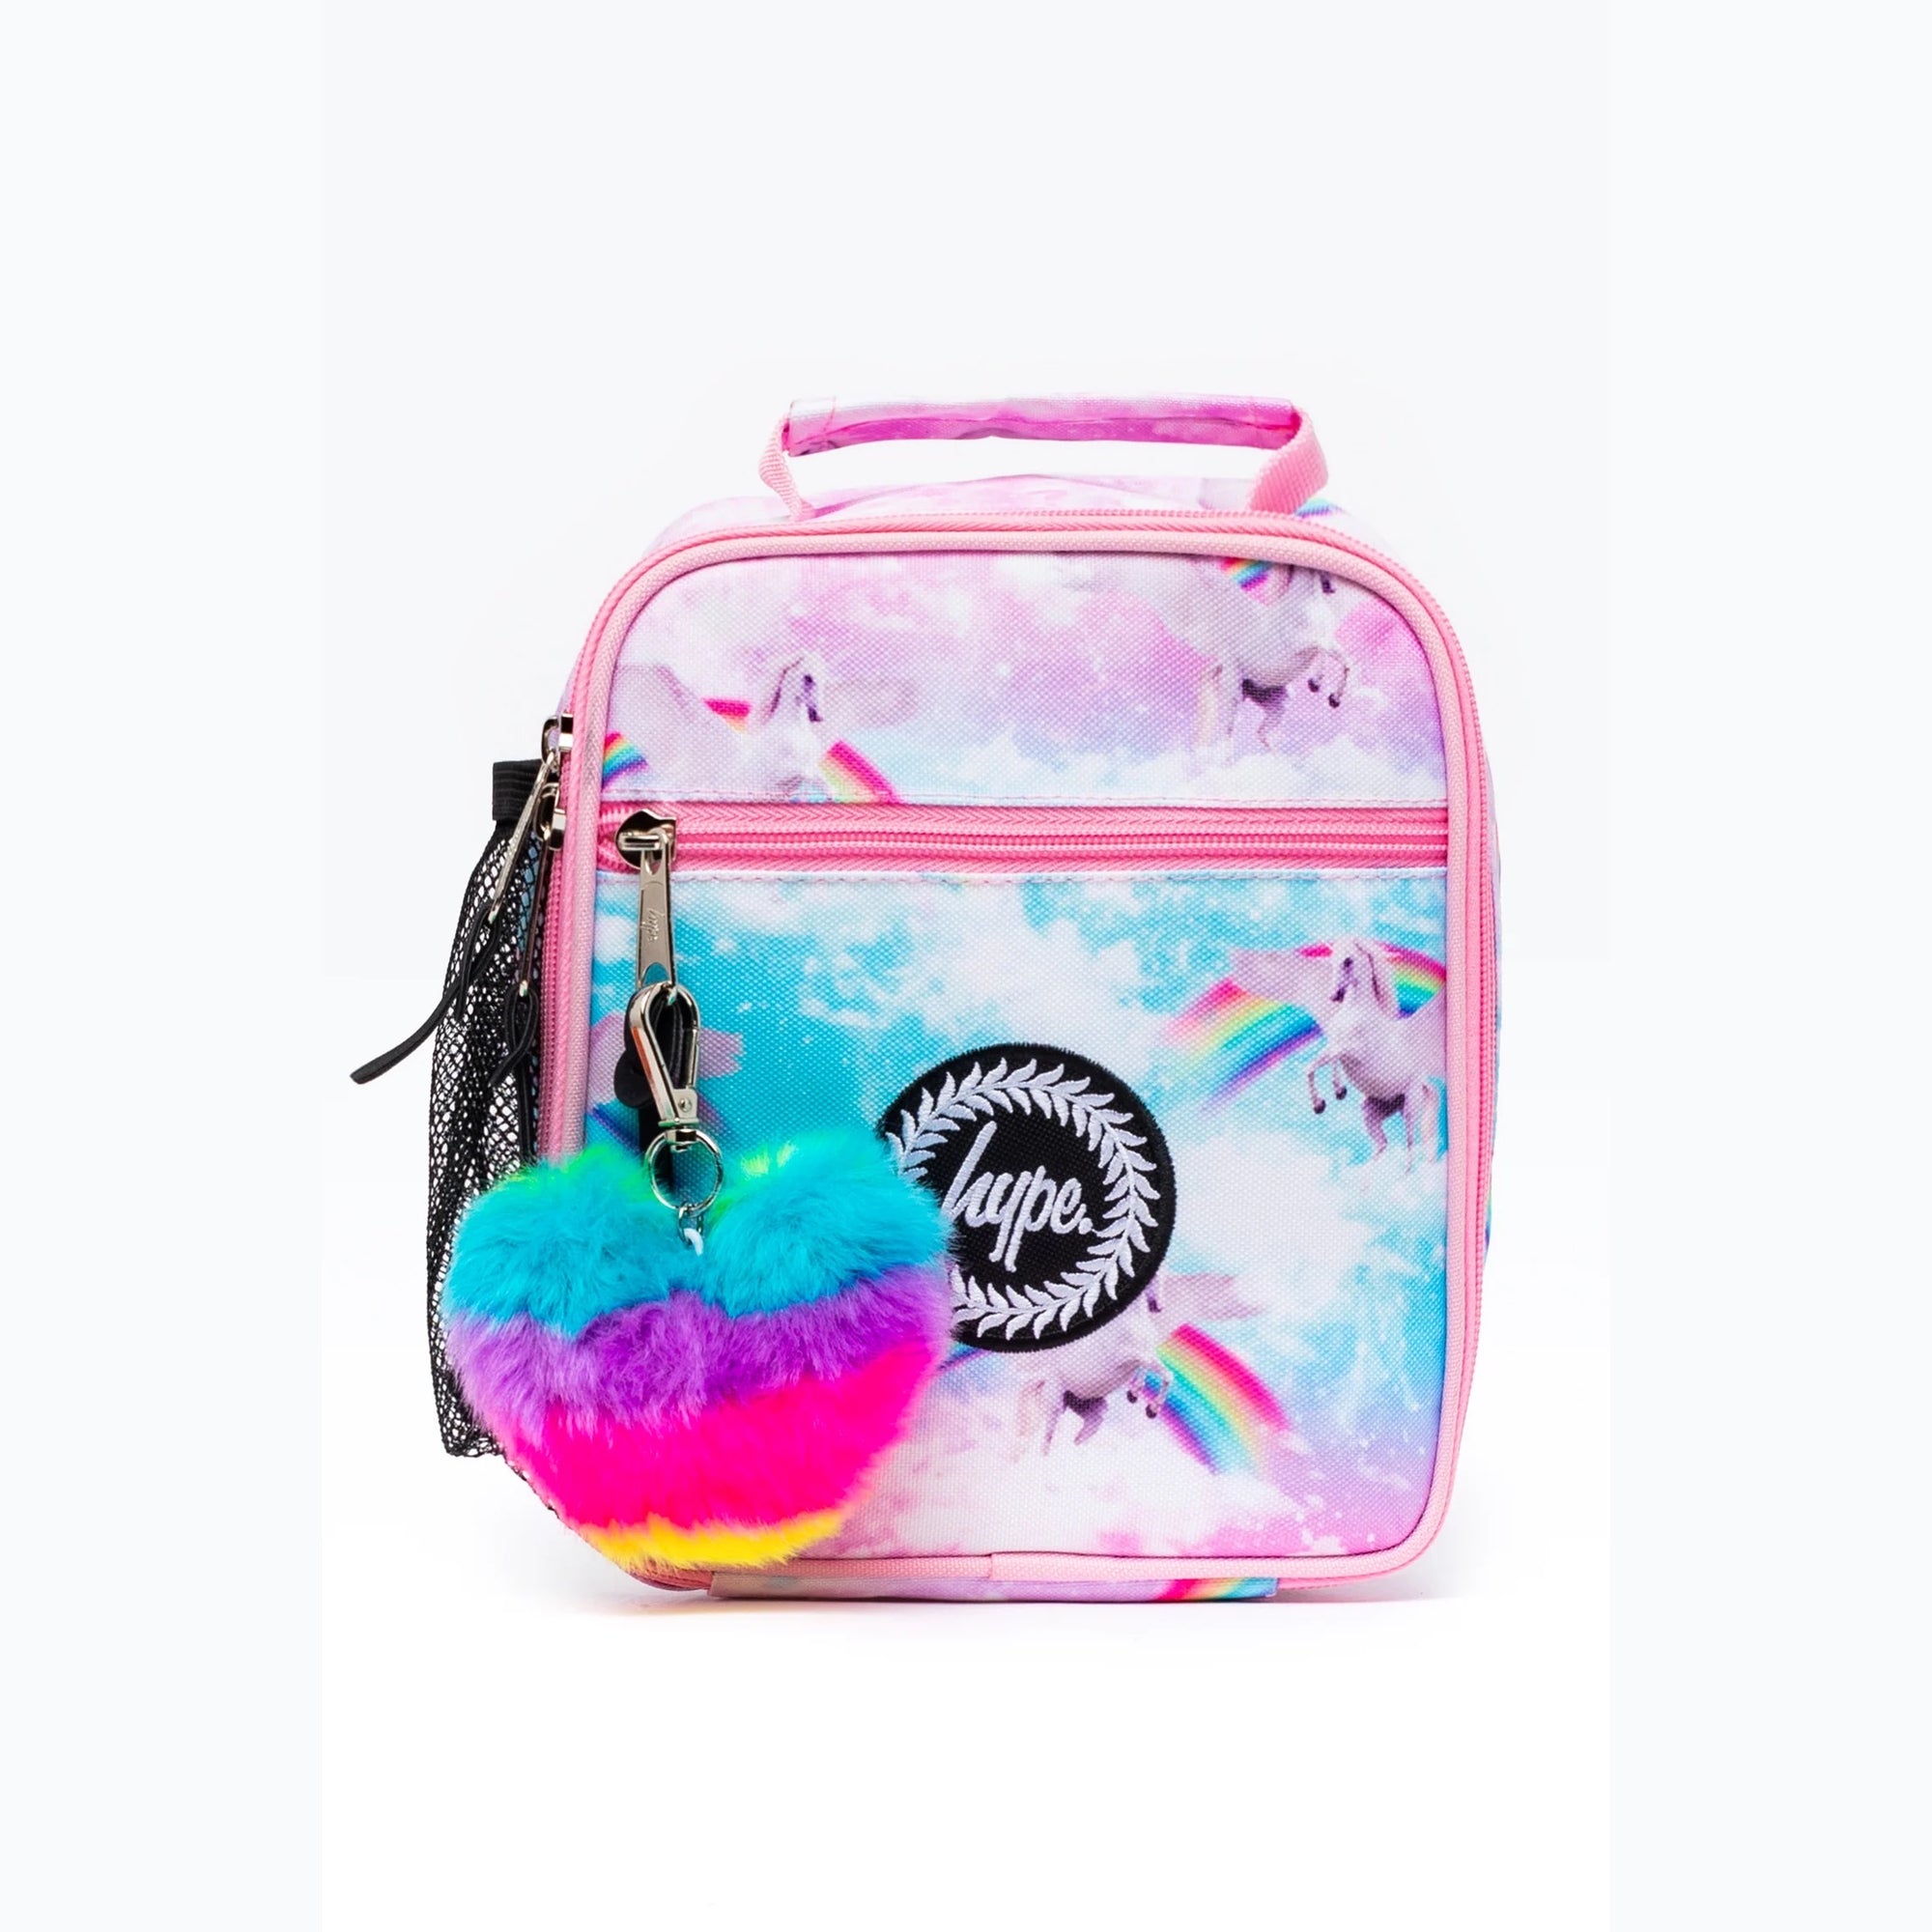 Hype Unicorn Skies Lunch Bag Accessories ONE SIZE / Multi